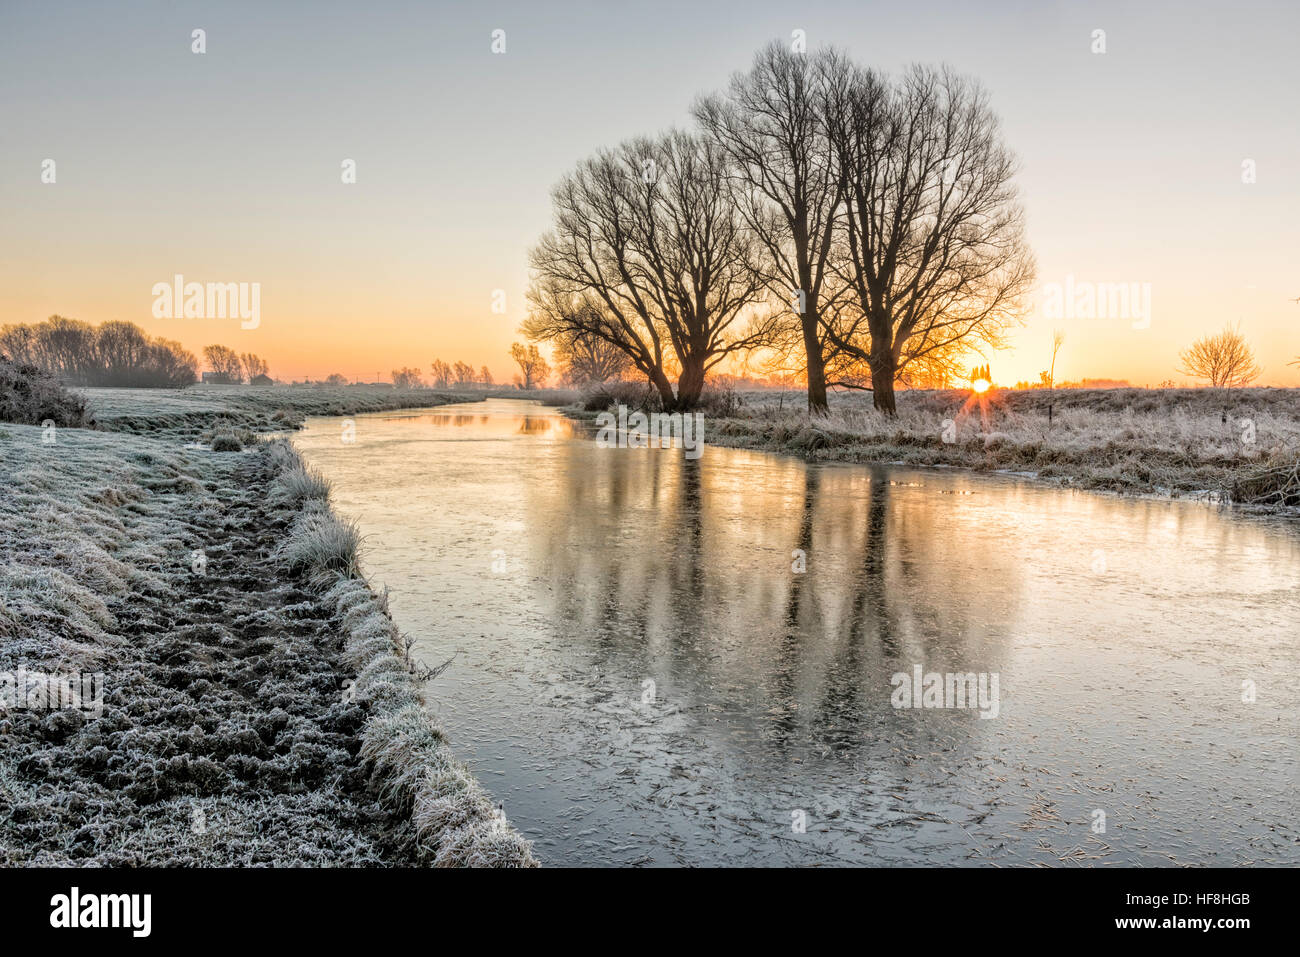 Willingham, Cambridgeshire, UK. 29th Dec, 2016. The sun rises on a frozen Fenland landscape over the Old West River. Temperatures dropped to around minus 4 degrees centigrade overnight with a widespread frost and patchy fog at dawn. © Julian Eales/Alamy Live News Stock Photo